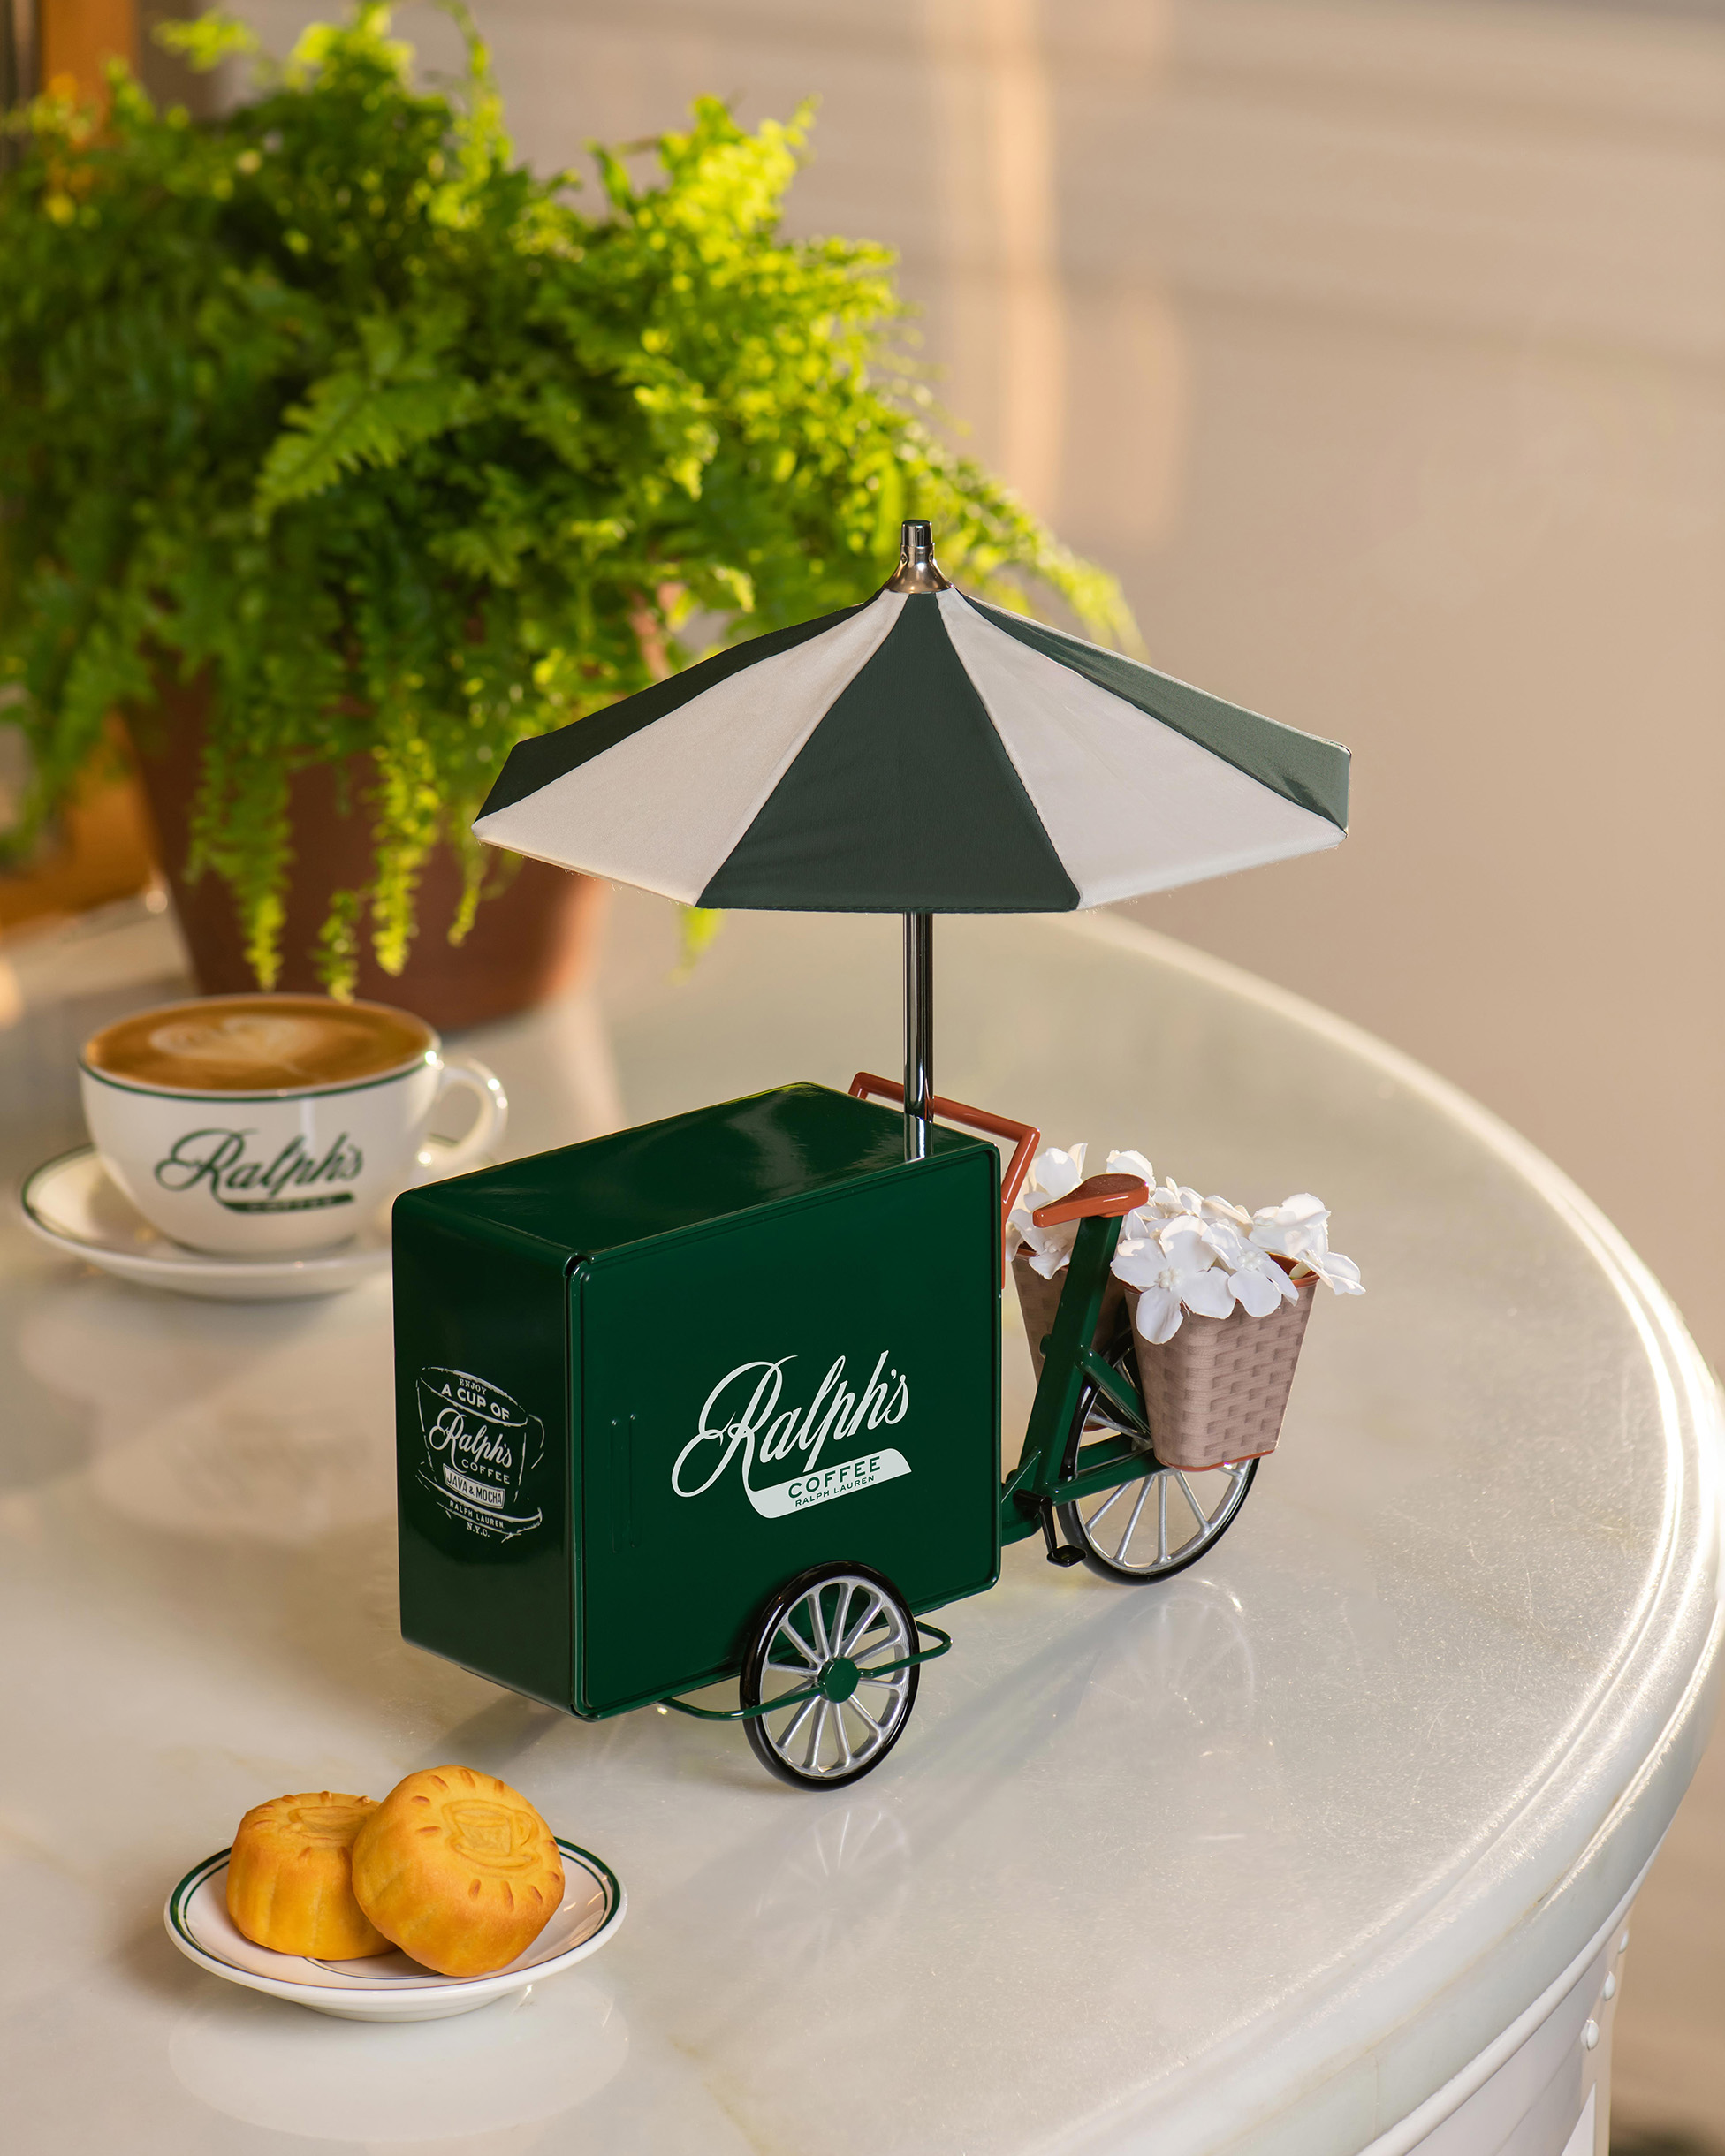 Ralph's Coffee Trike Mooncake Tin Box features two exquisite flavours